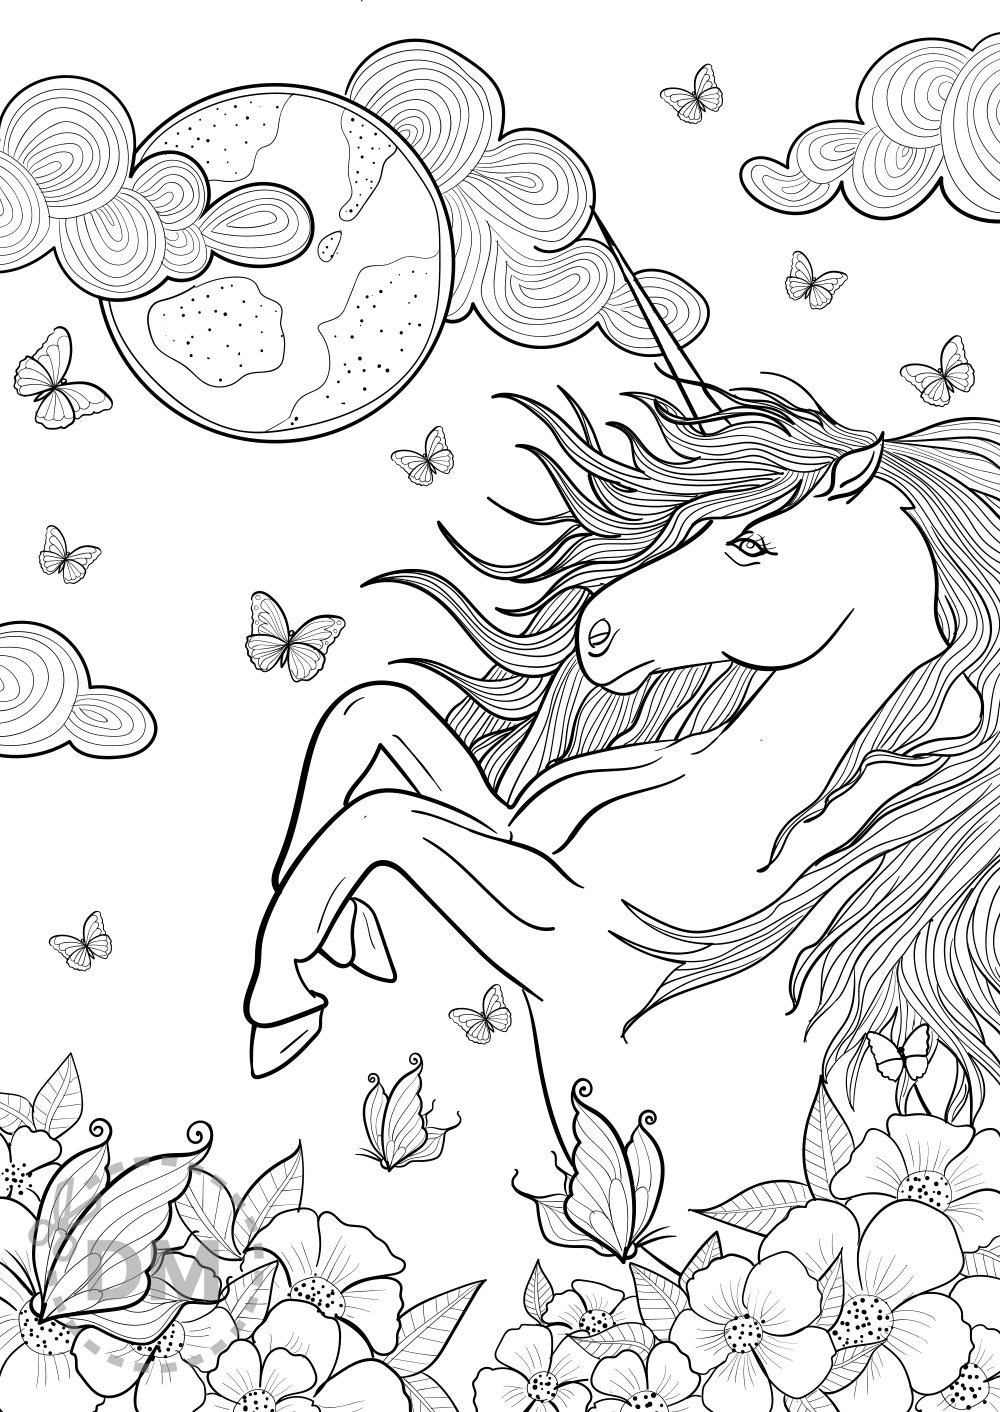 Unicorn Lol Doll Coloring Page for Girls - Rainbows and Star Theme